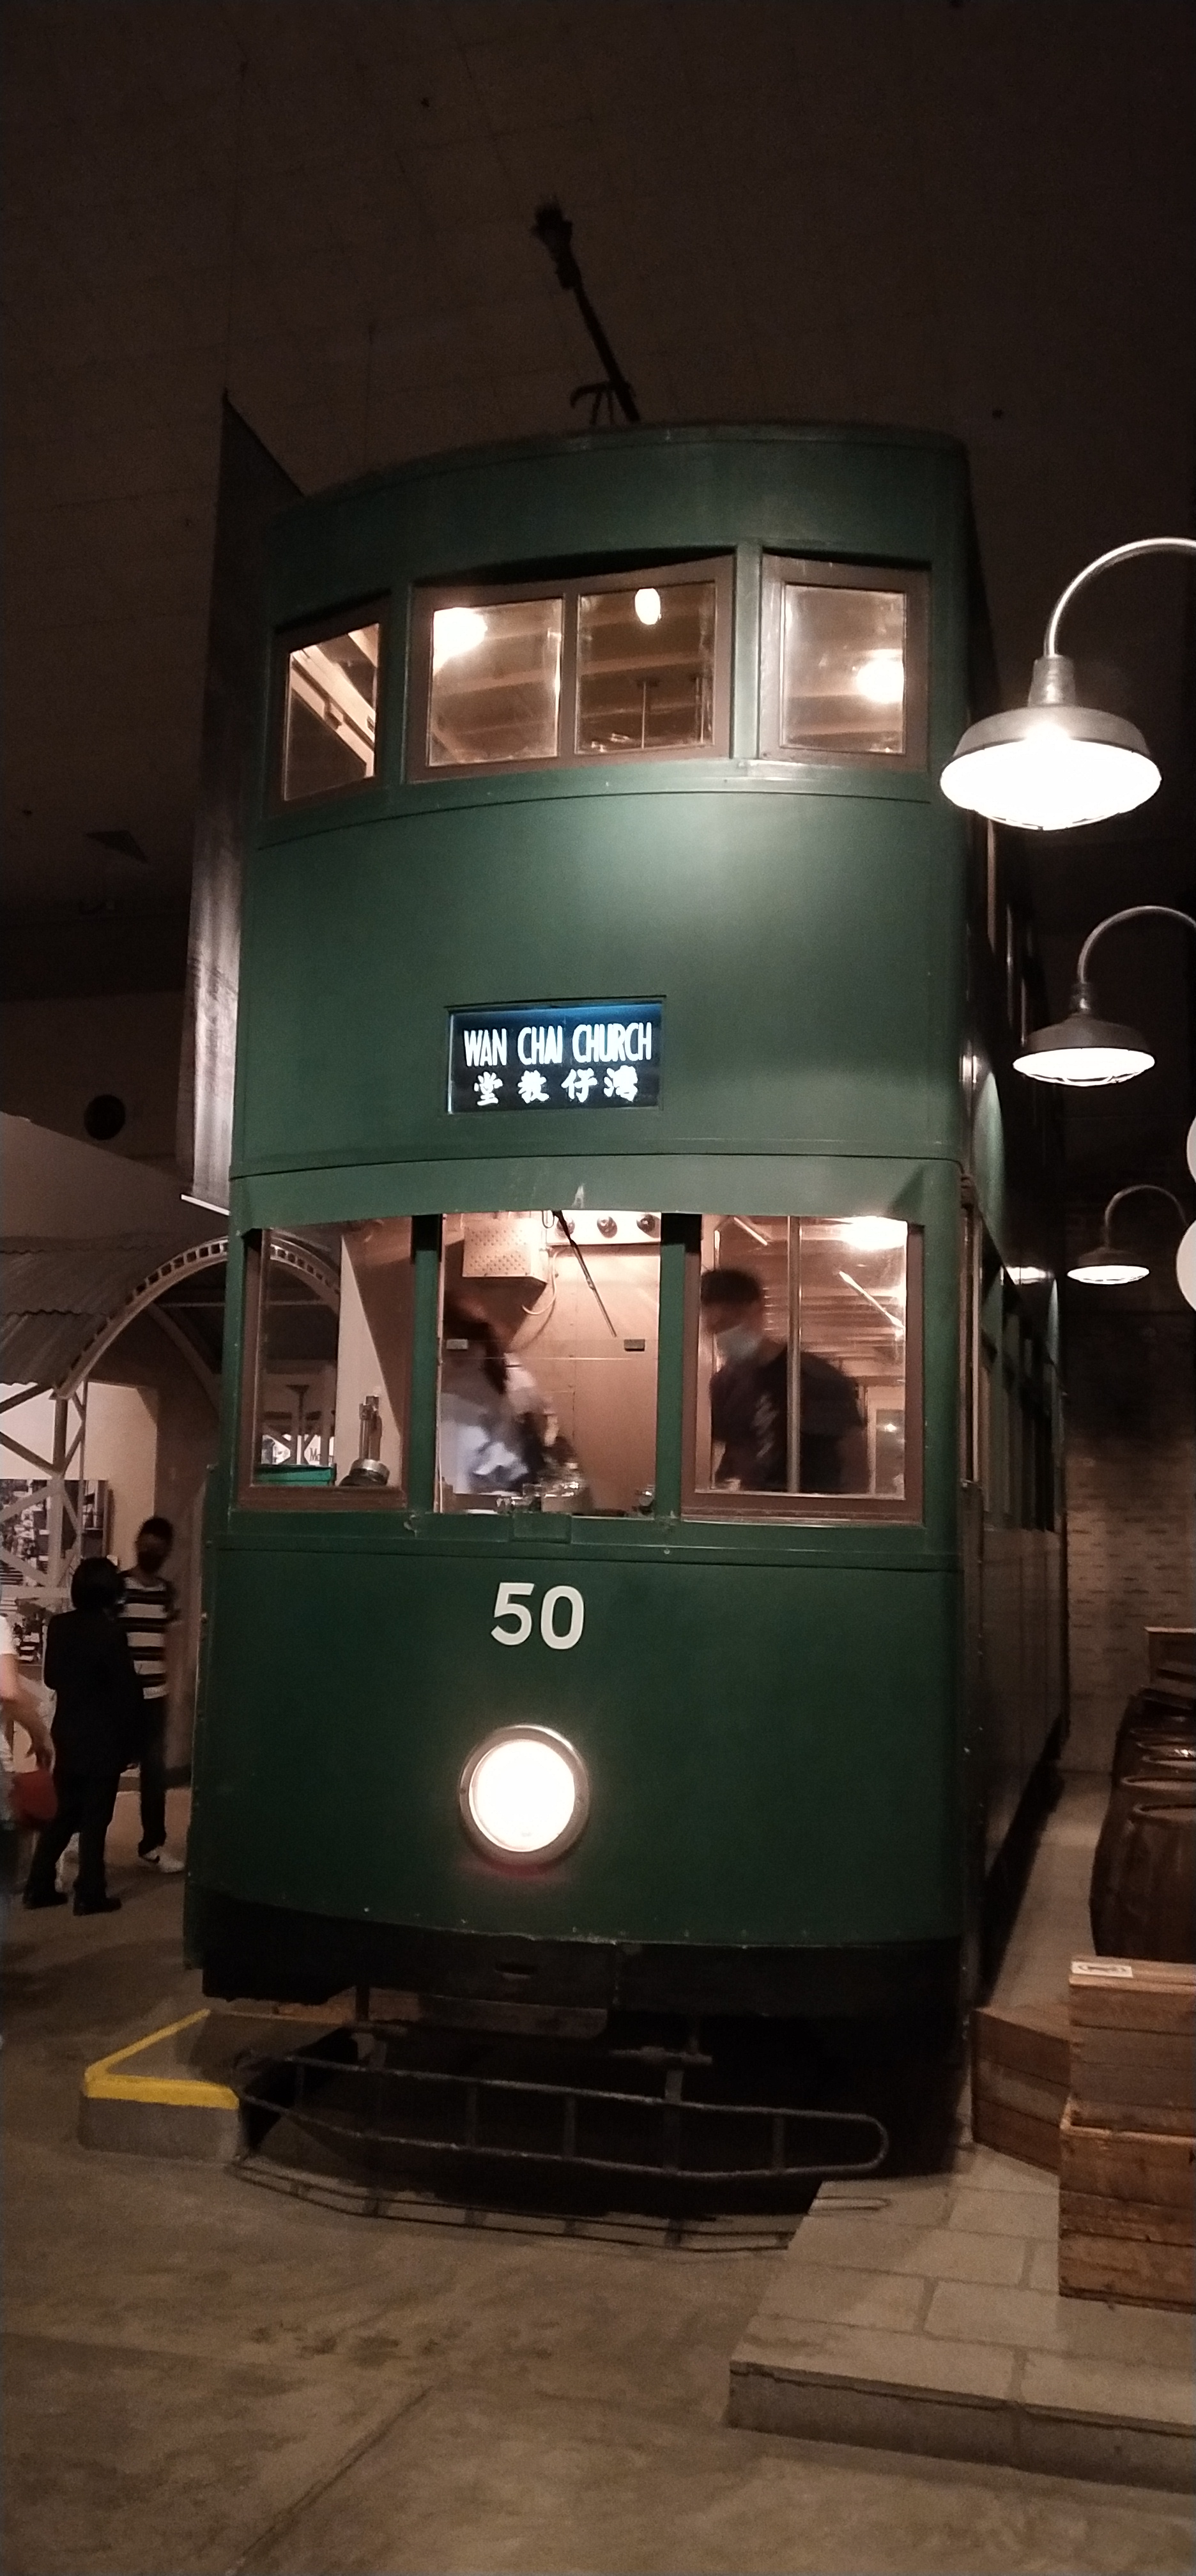 Hope the real tram exhibit can be kept